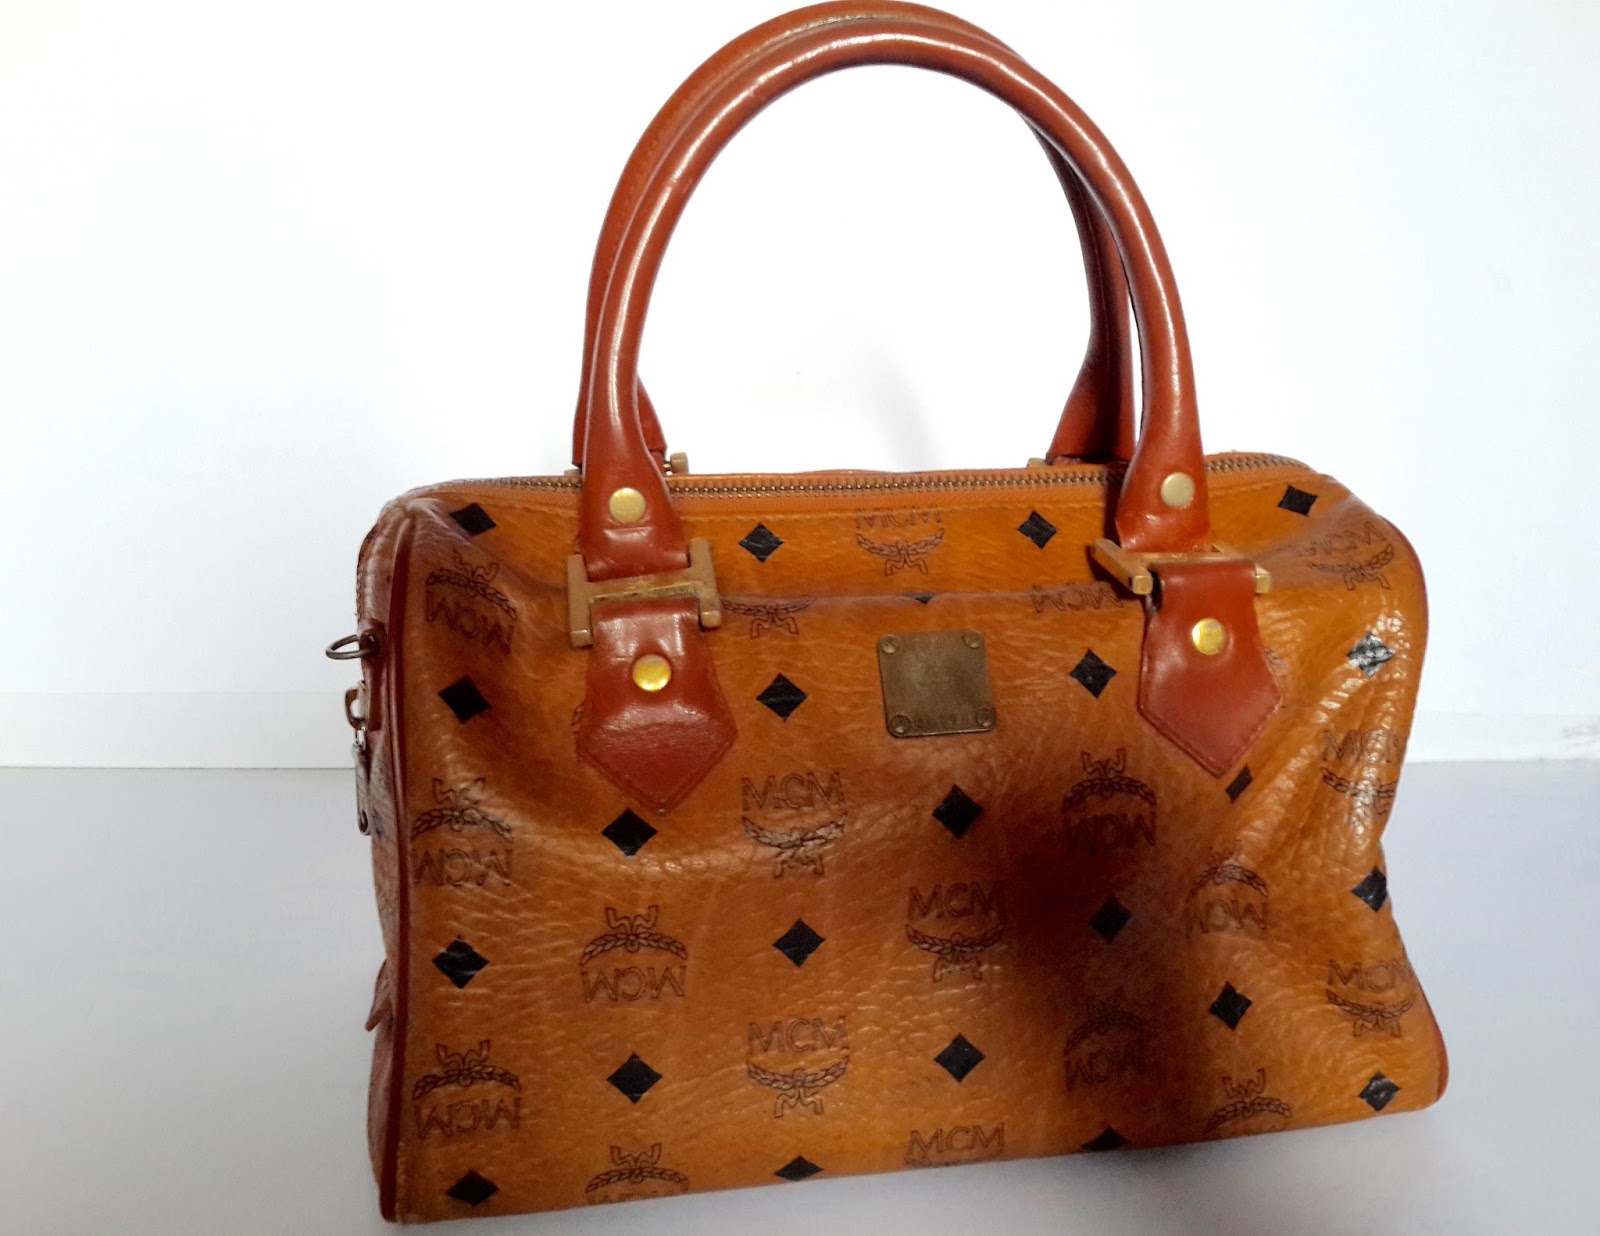 SNB Collection: Authentic MCM Speedy 25 A0778 Handbag(SOLD)